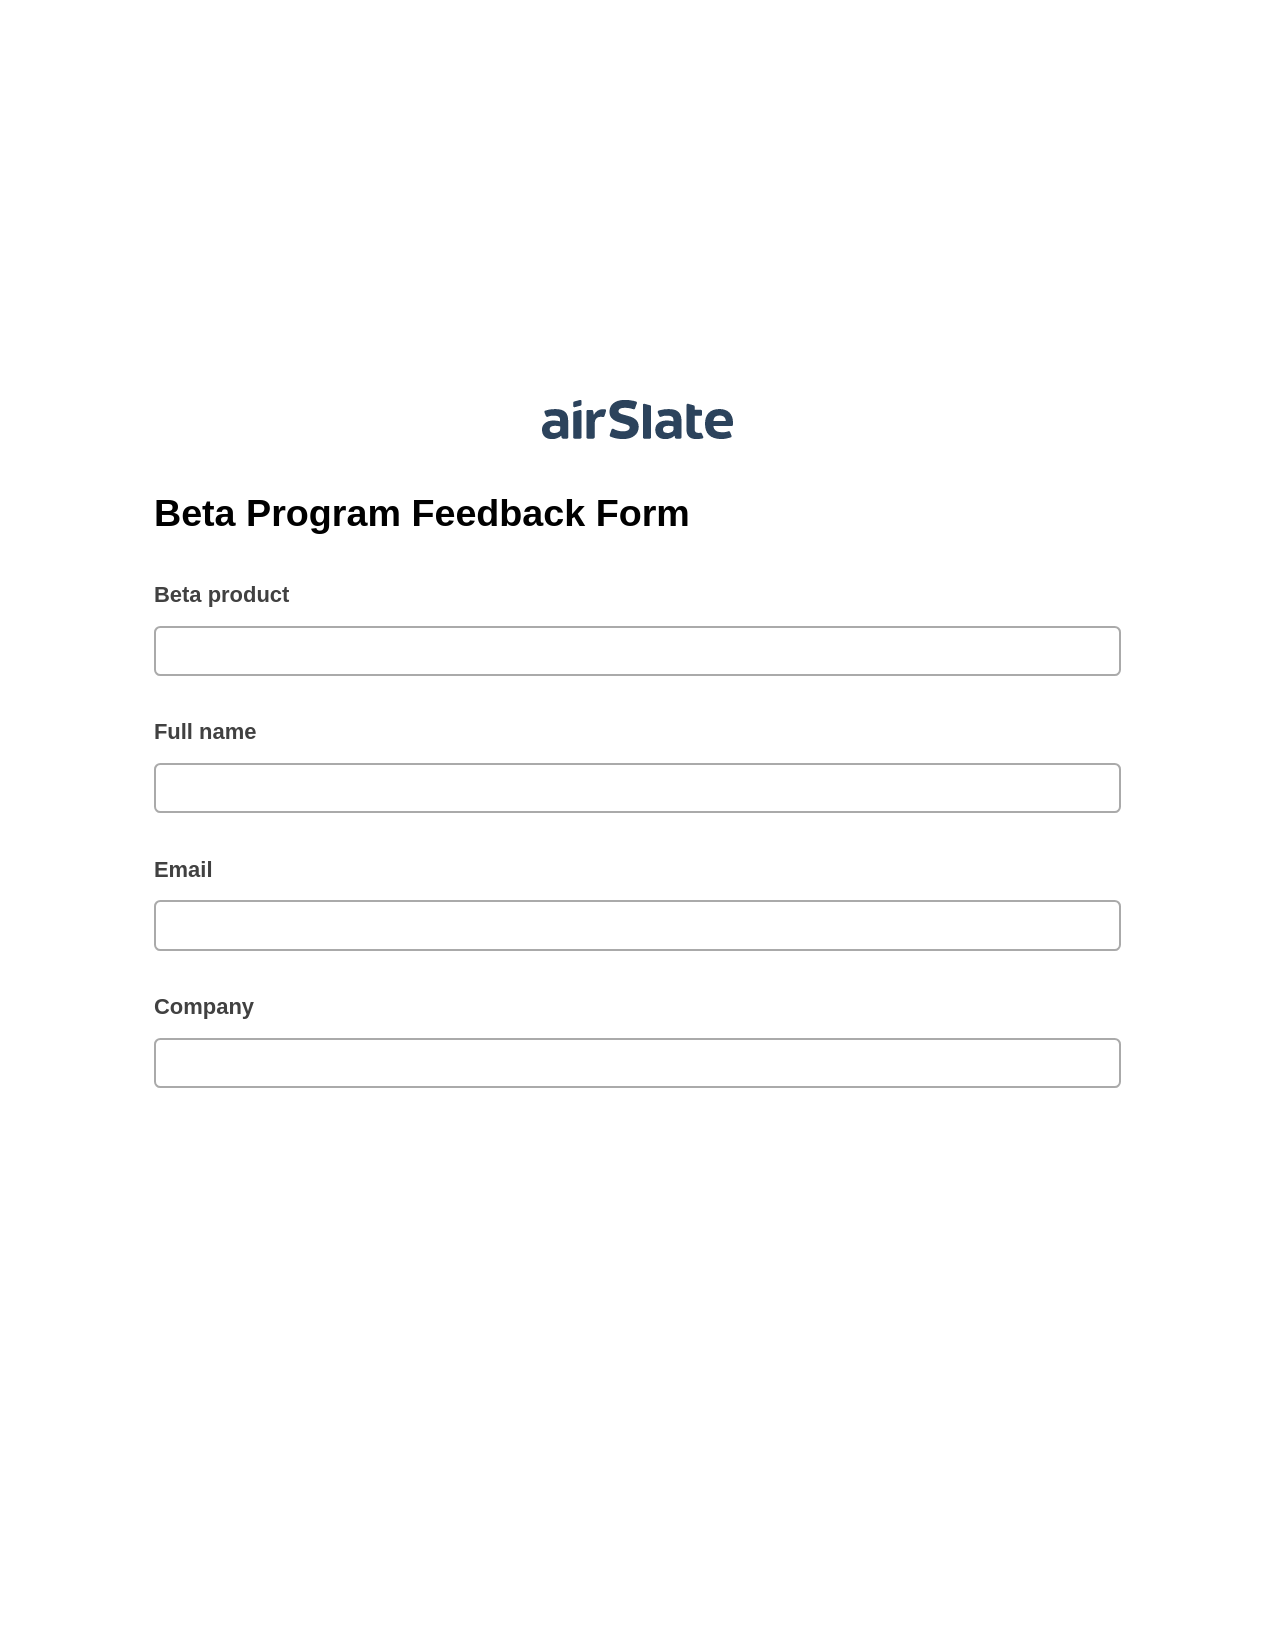 Multirole Beta Program Feedback Form Pre-fill from Salesforce Record Bot, Hide Signatures Bot, Export to Google Sheet Bot